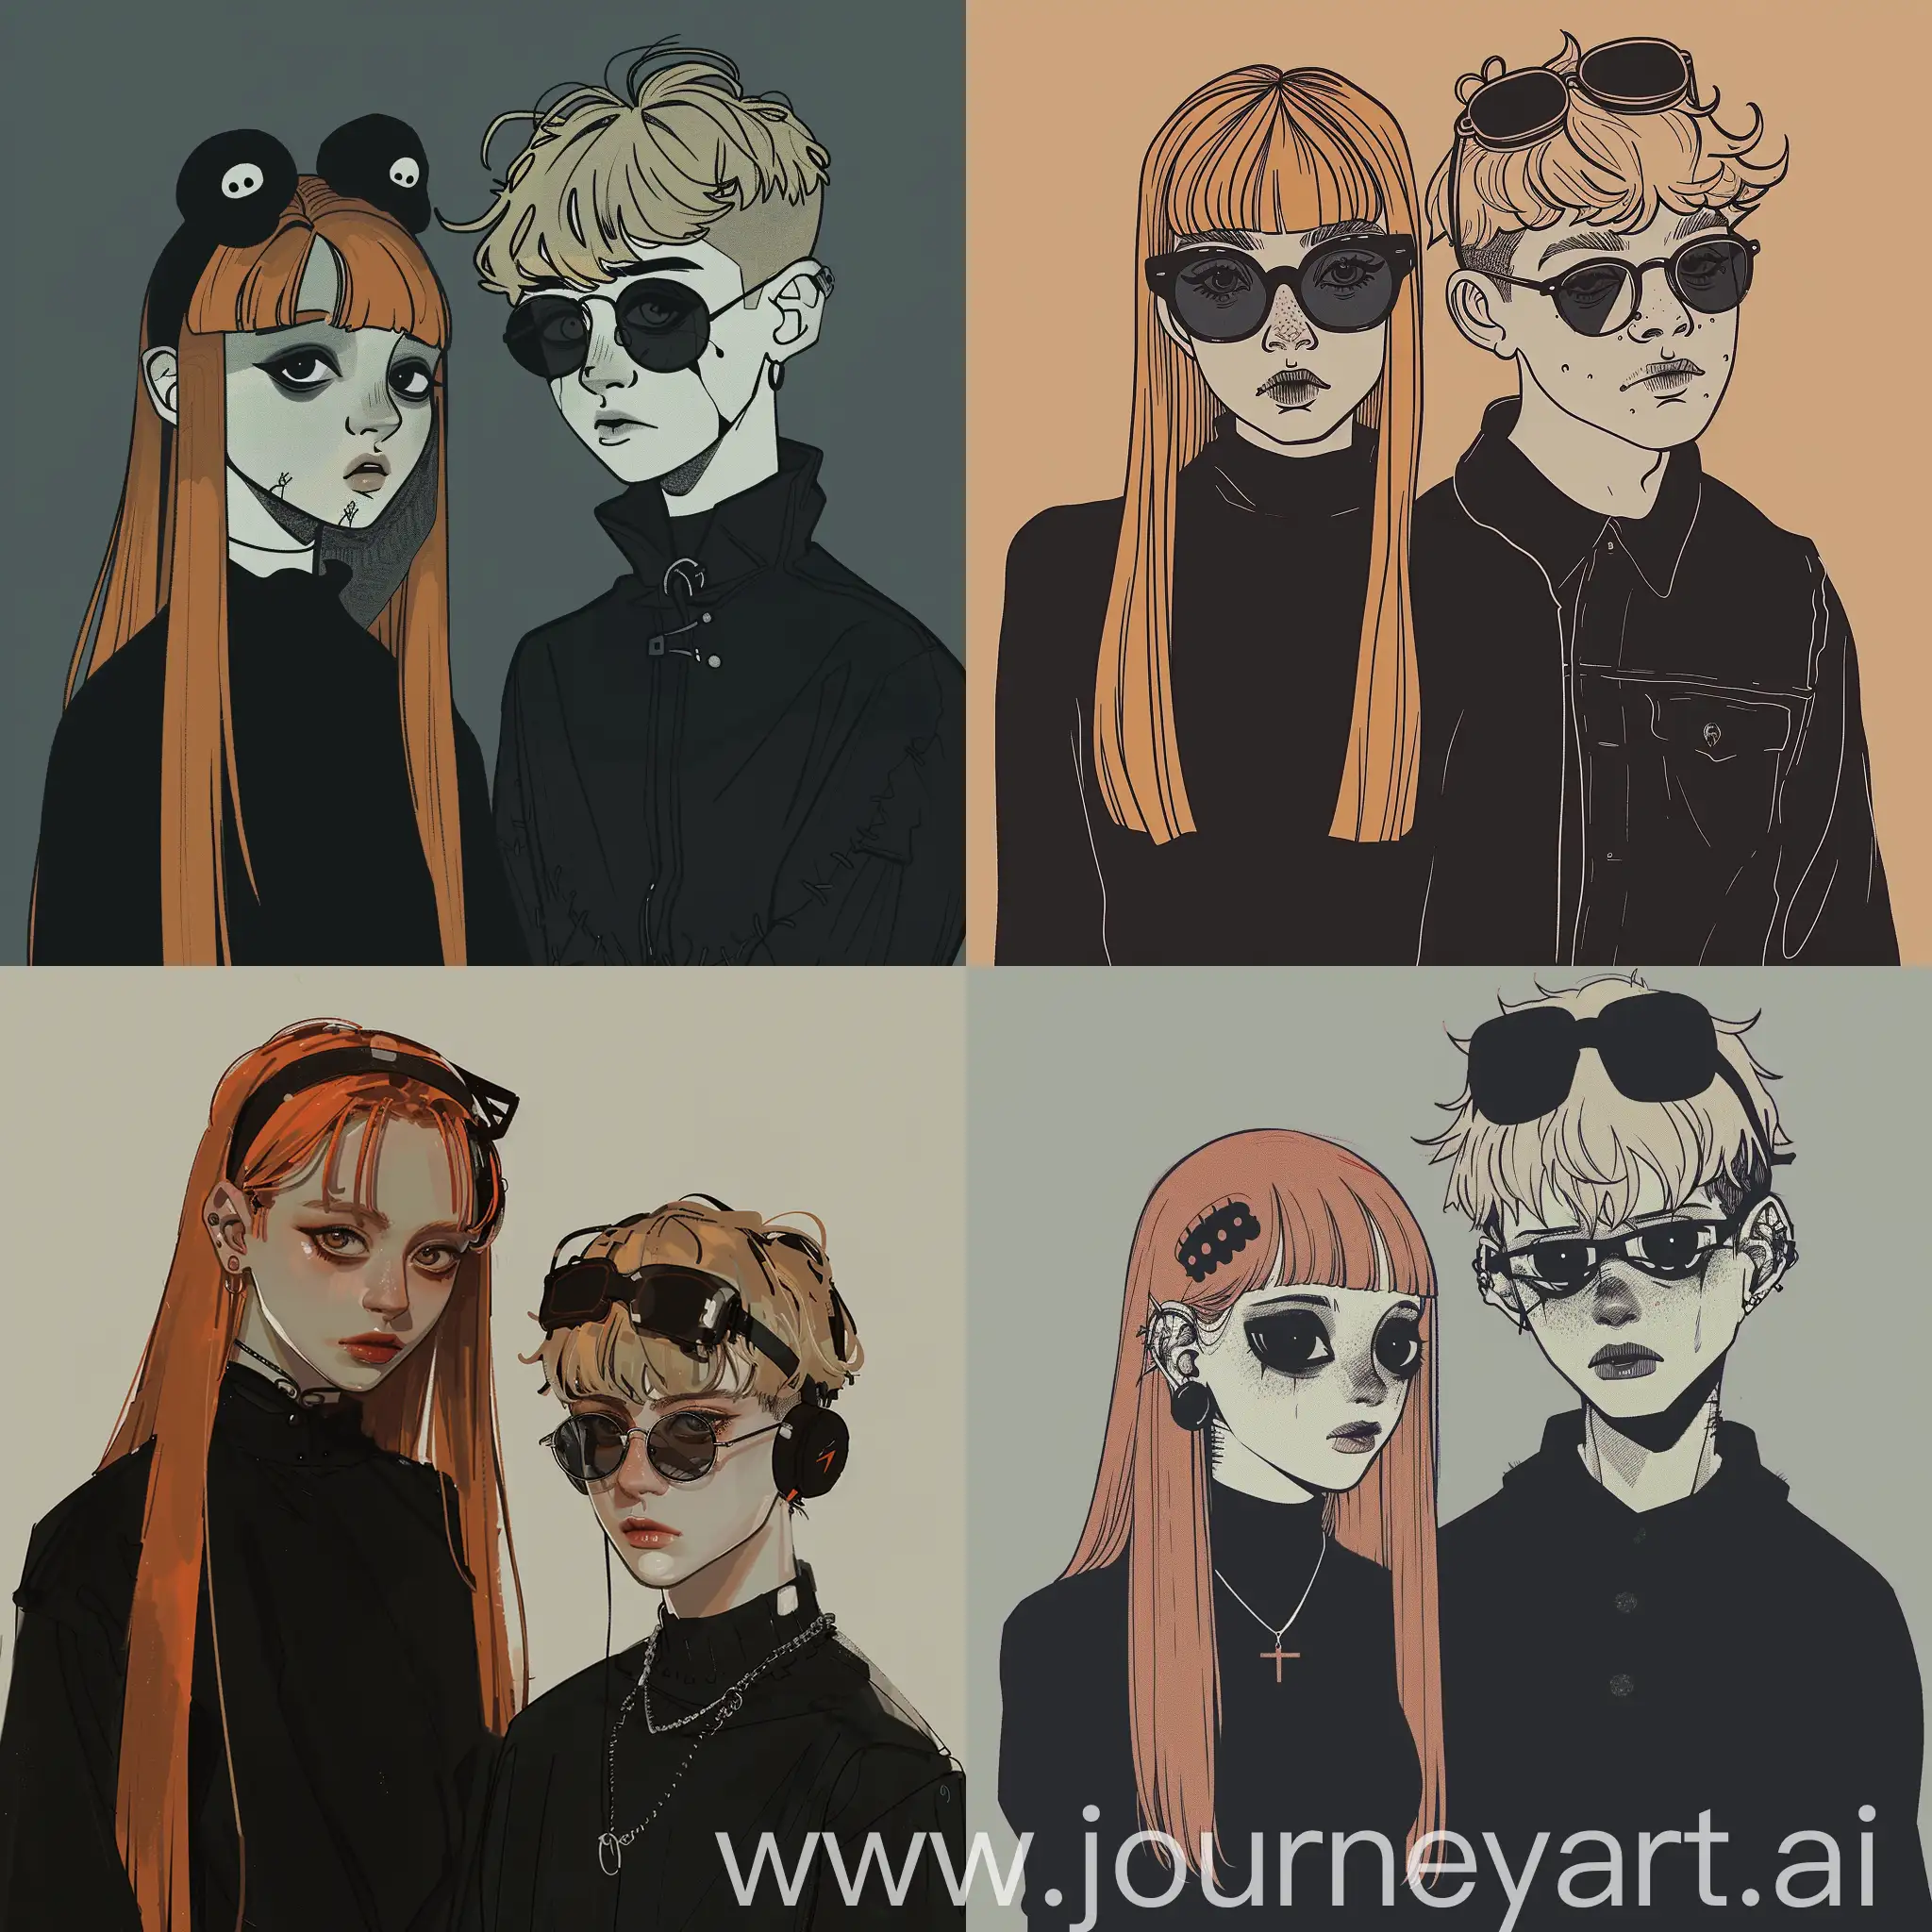 Dark-Animated-Drawing-of-a-Teenage-Duo-with-Ginger-and-Blonde-Hair